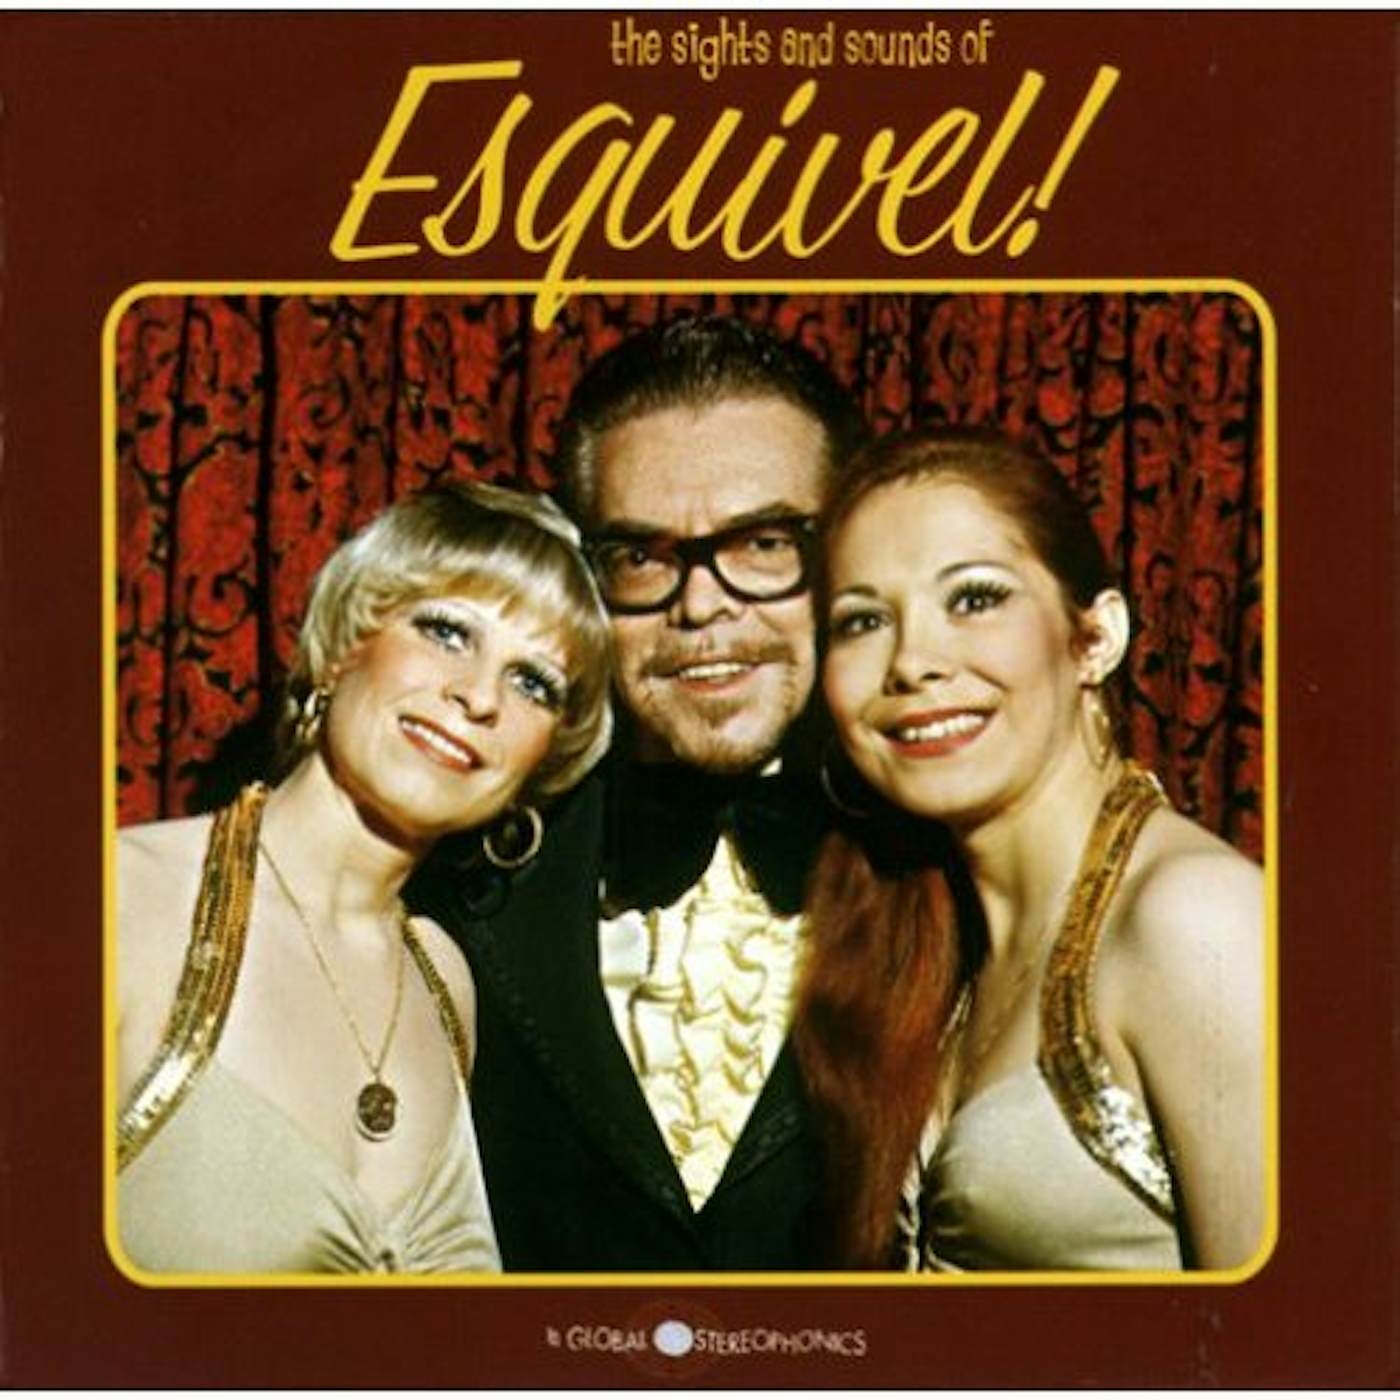 SIGHTS & SOUNDS OF Esquivel! CD